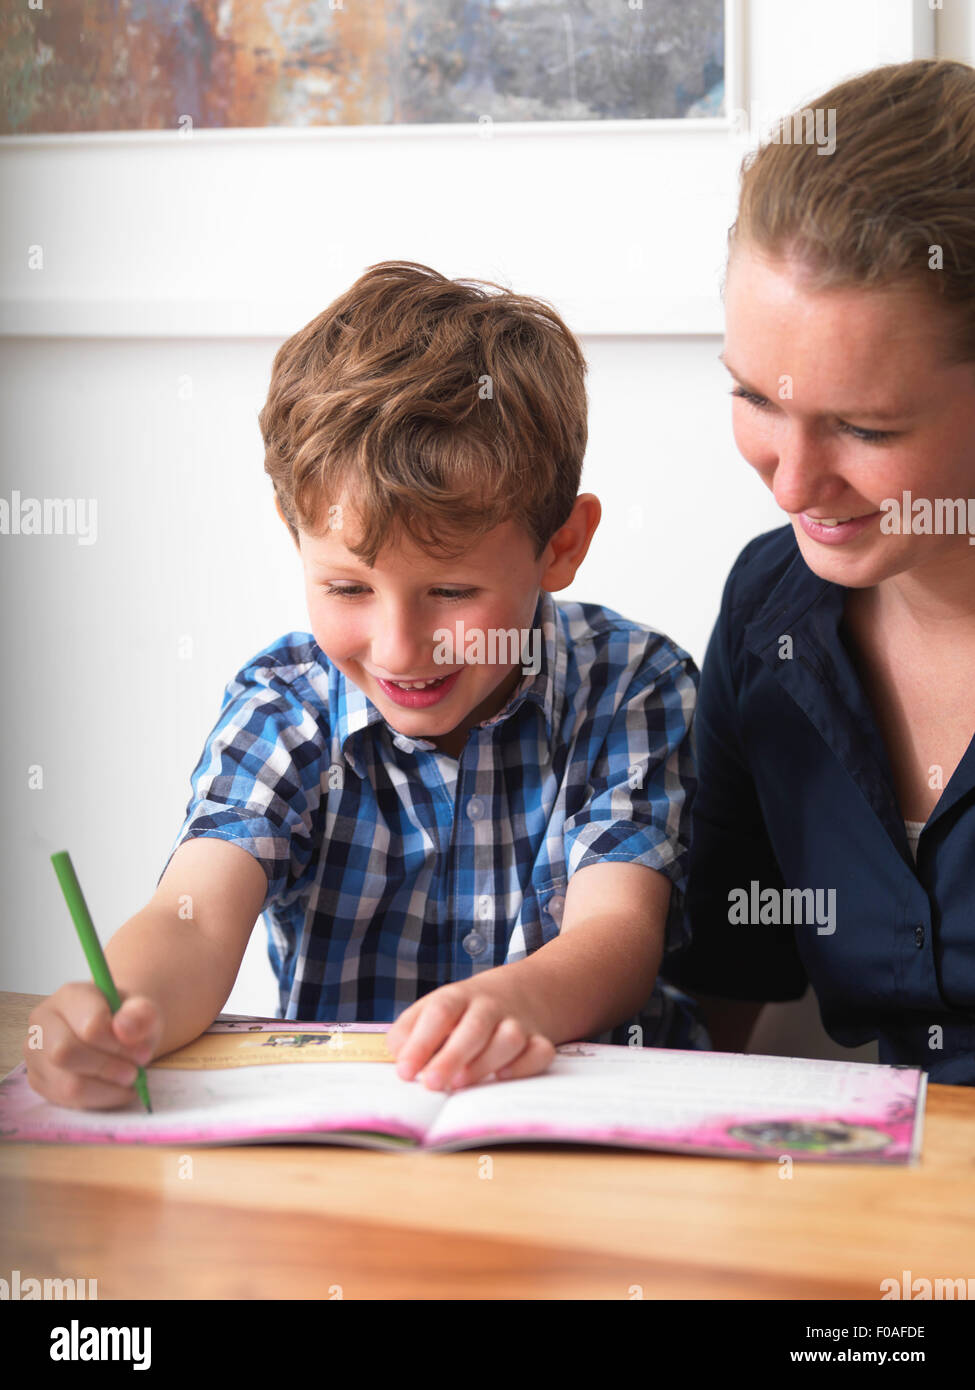 A six year old being helped with his homework by his mother at home Stock Photo